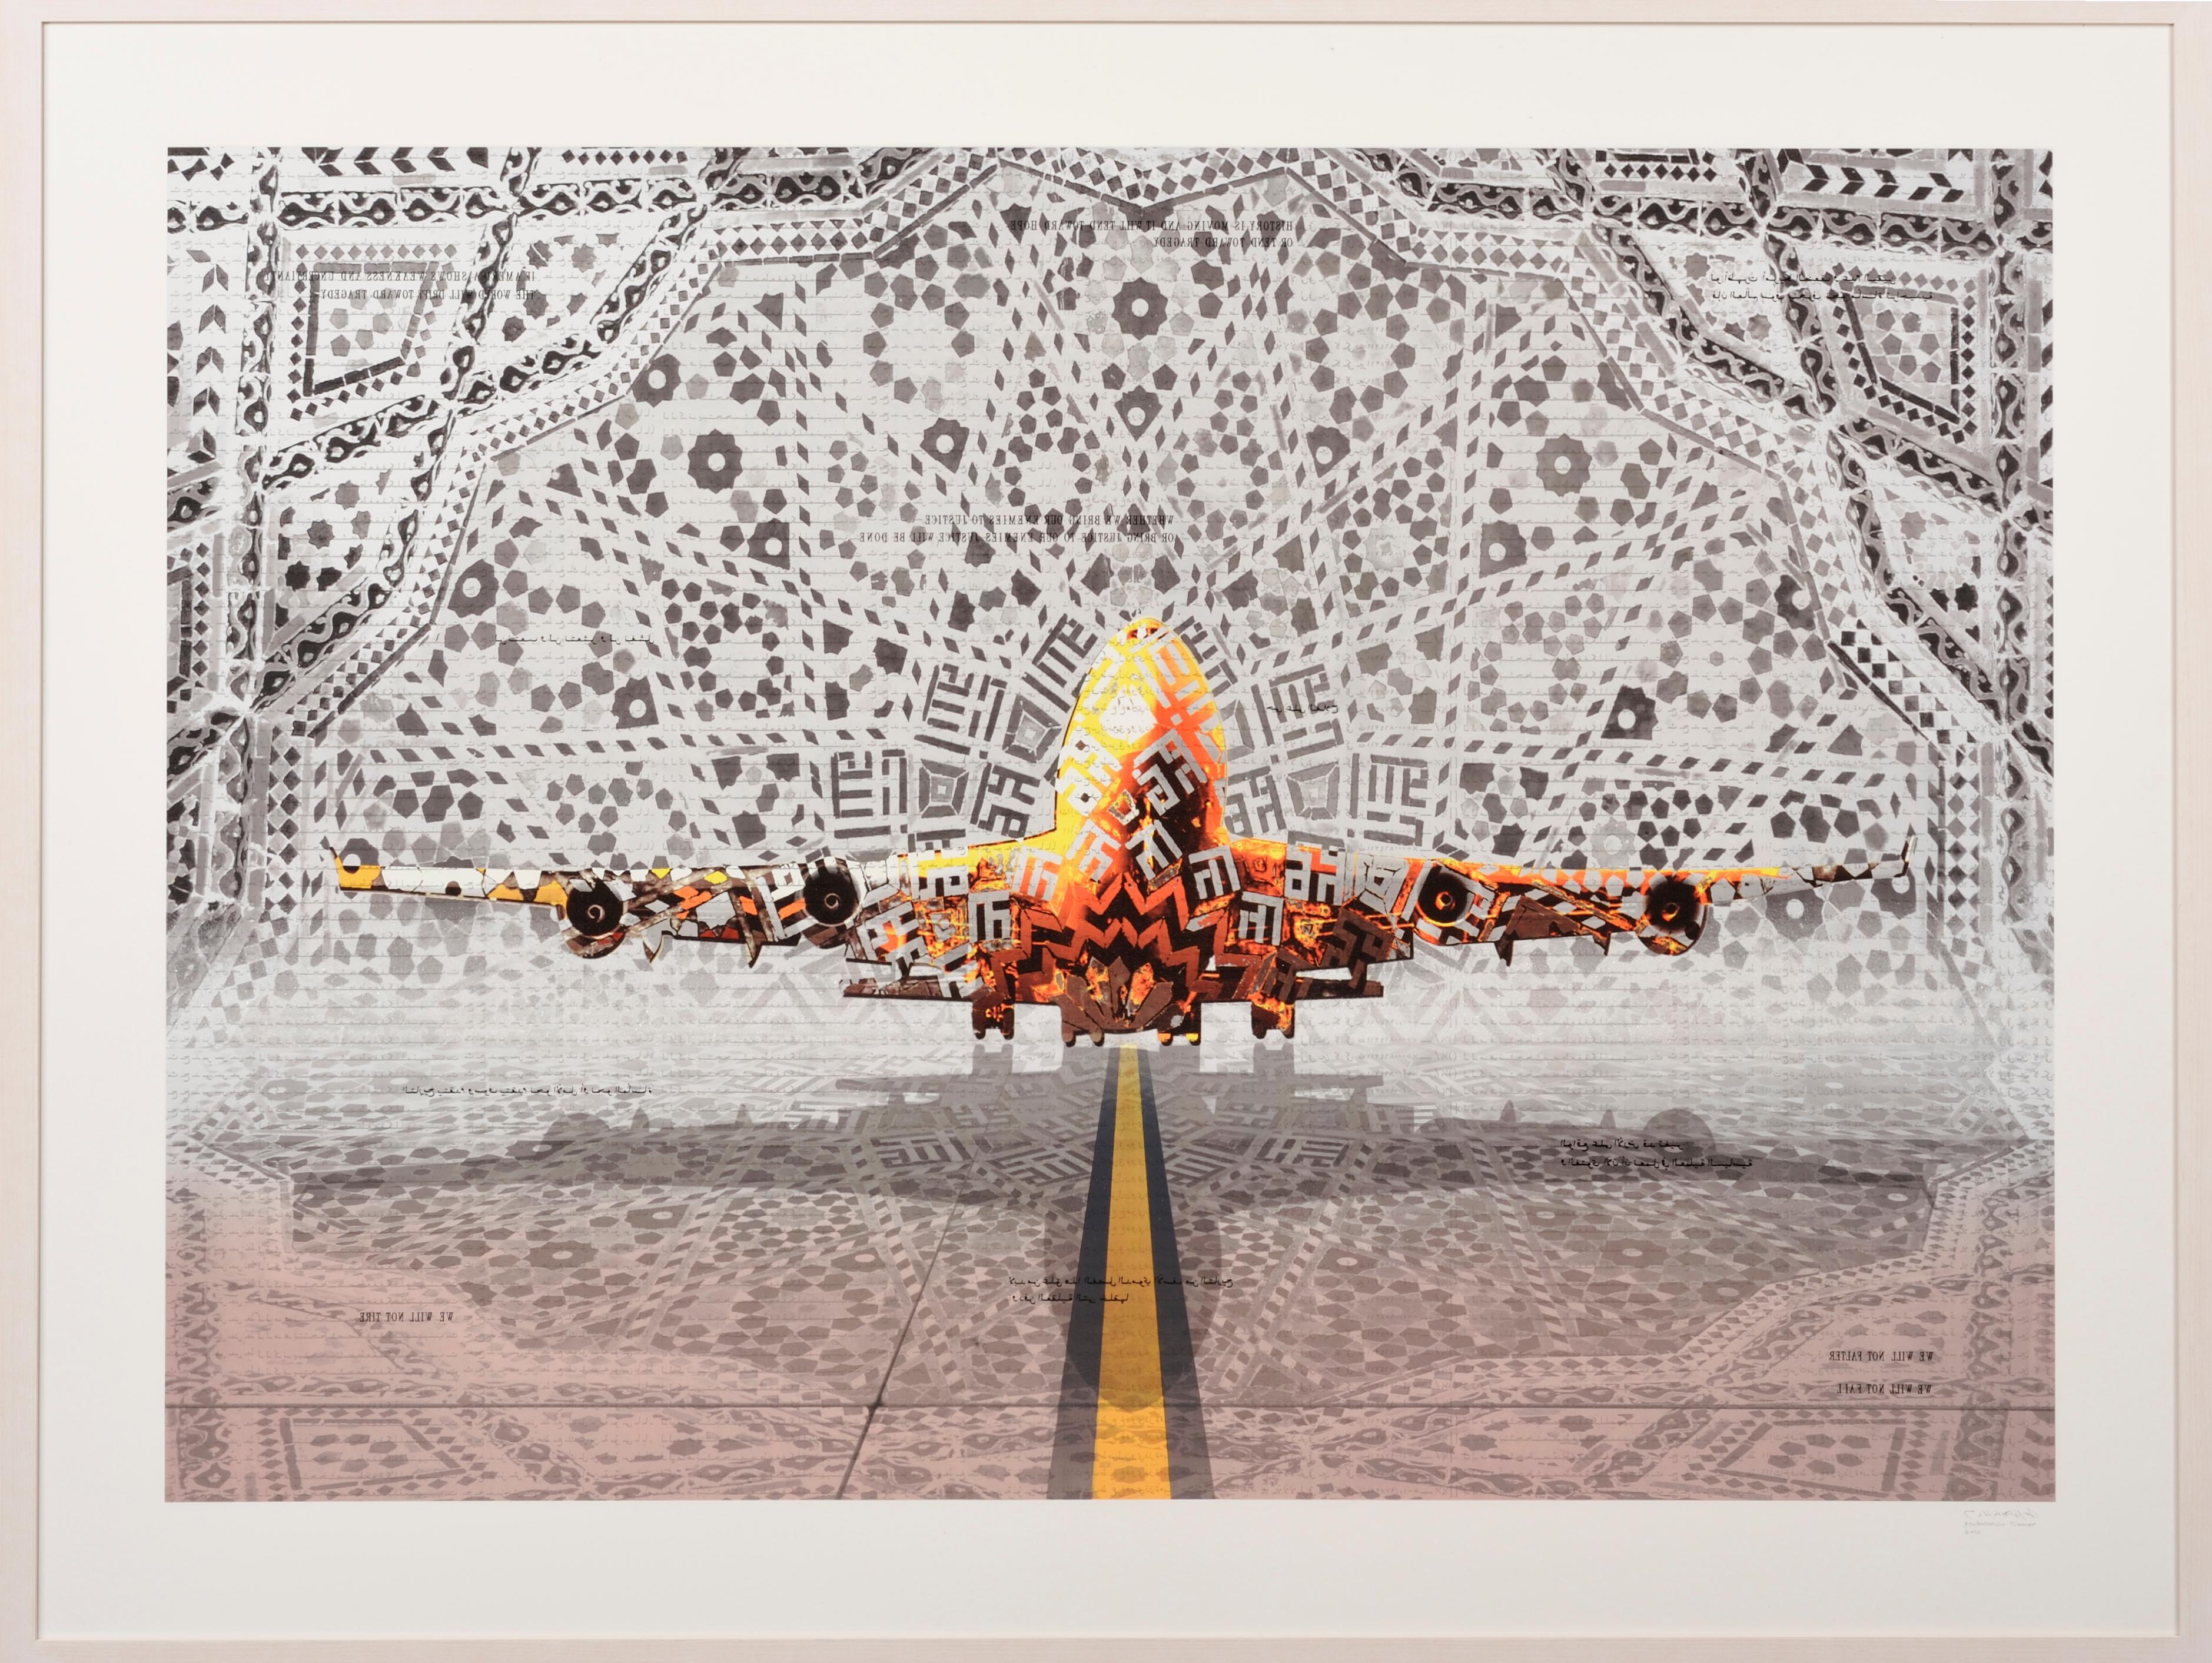 Abdulnasser Gharem
In Transit (with Diamond Dust)
2013
Silkscreen with Diamond Dust
137 × 182 cm (53.9 × 71.7 in), unframed
Signed and dated on the front
Edition of 45
In mint condition and accompanied by a certificate of authenticity

PLEASE NOTE: